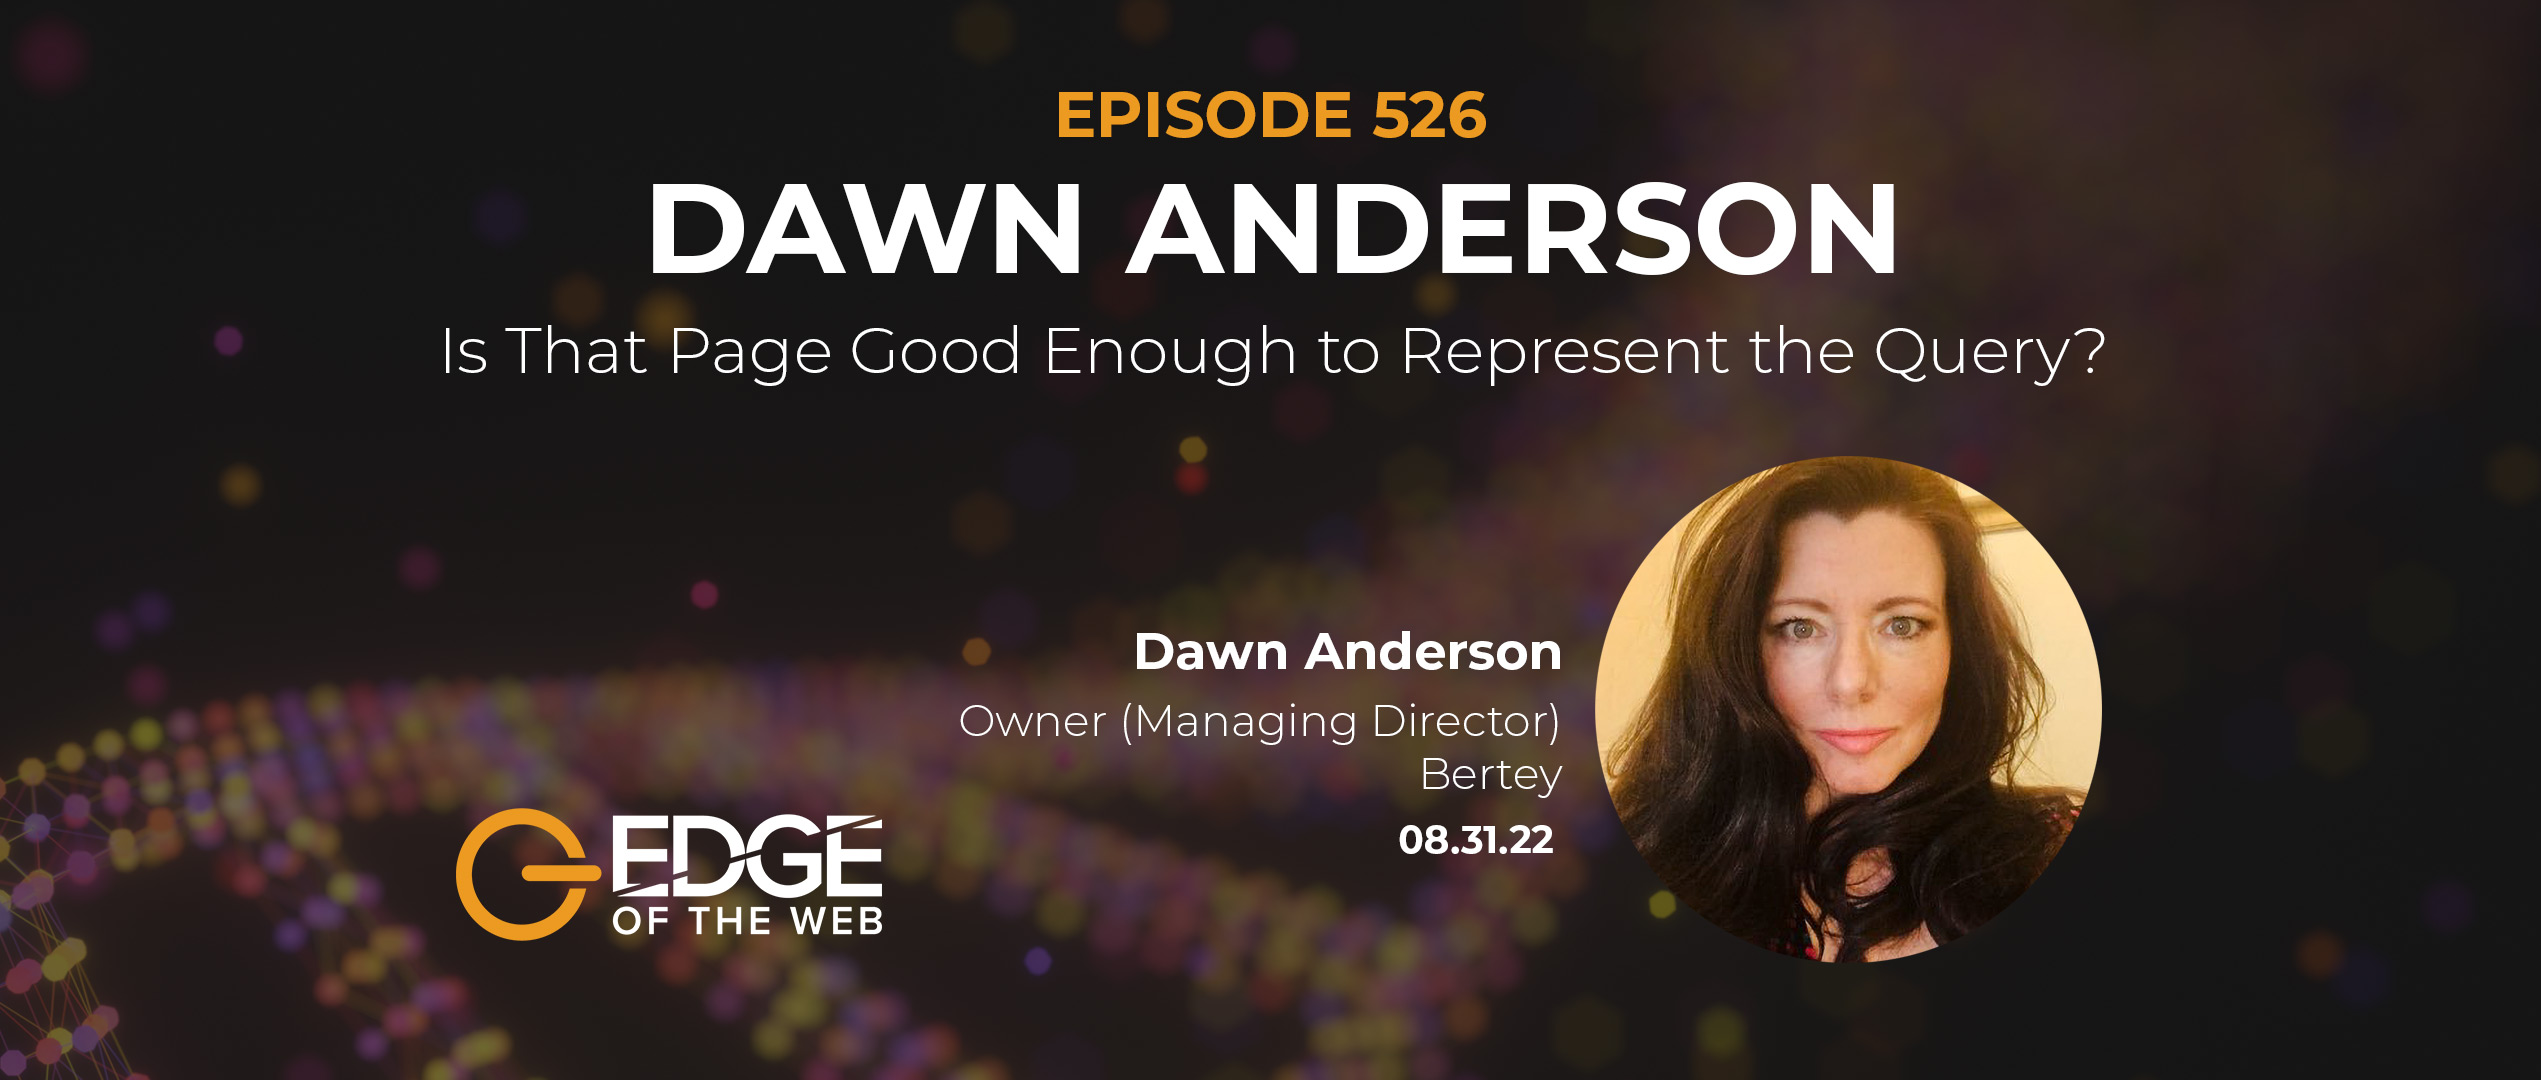 Dawn Anderson EDGE Episode 526 Featured Image